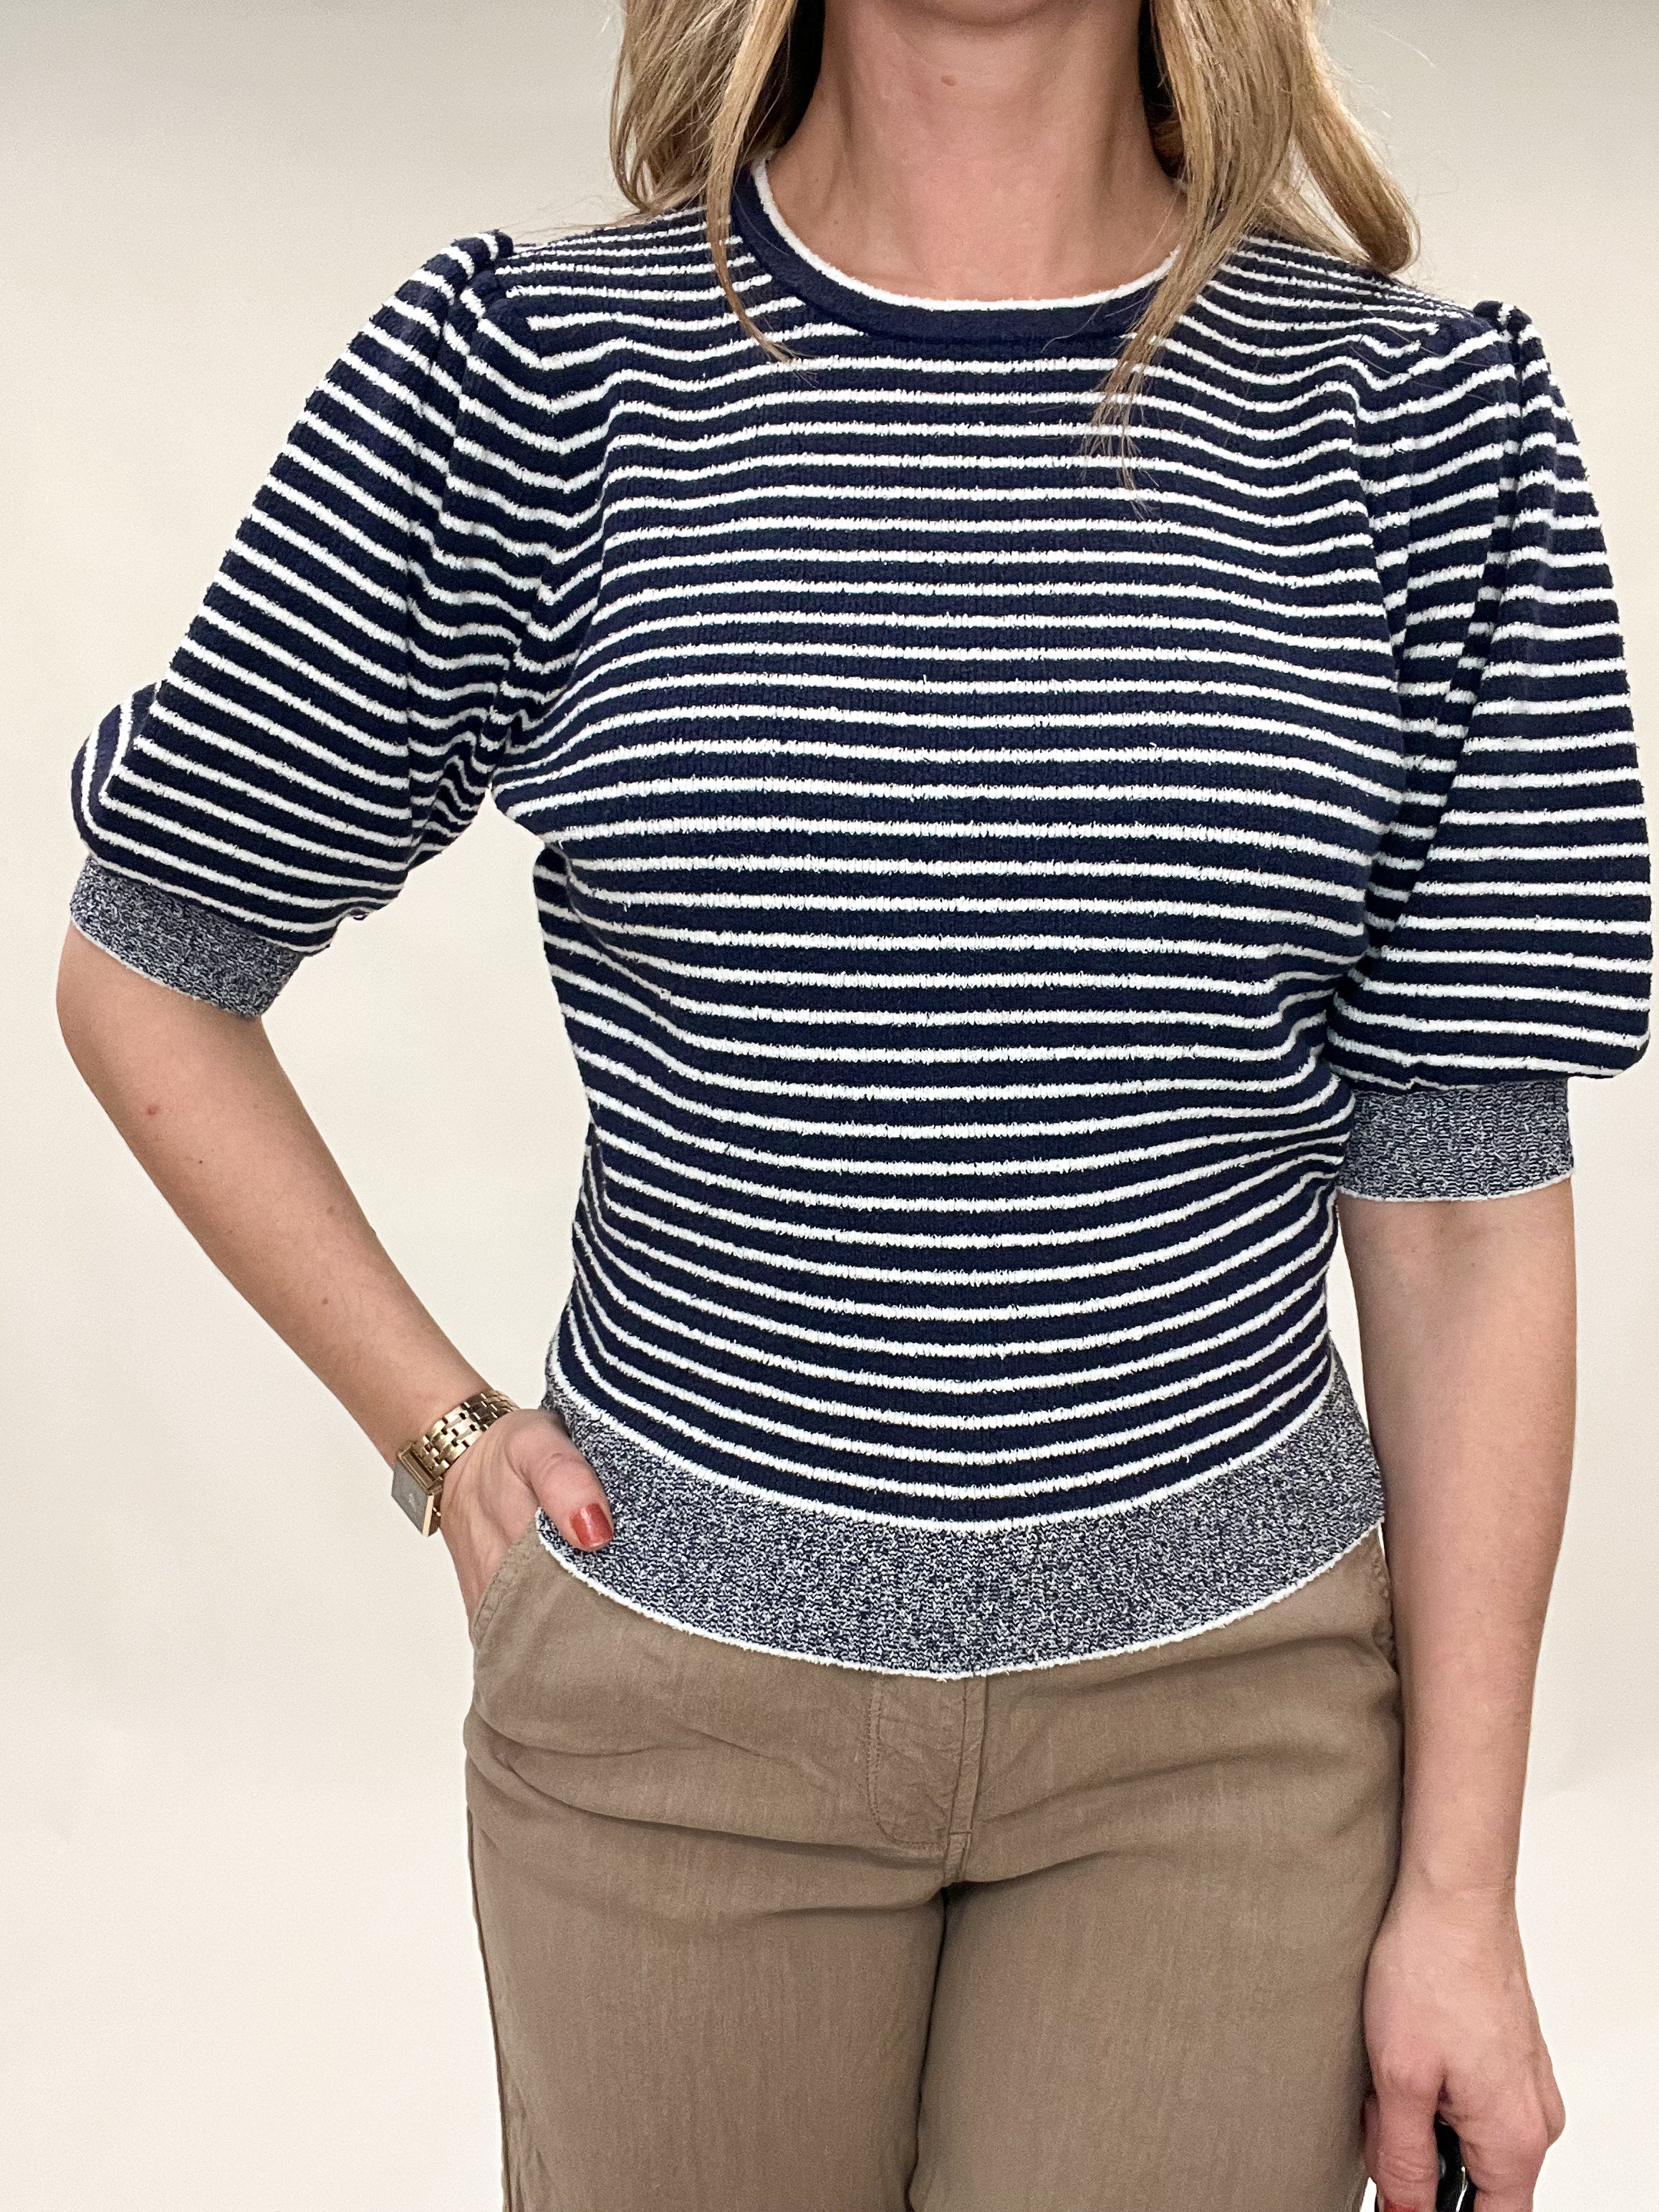 Tops & Sweaters – Cotton & Cashmere